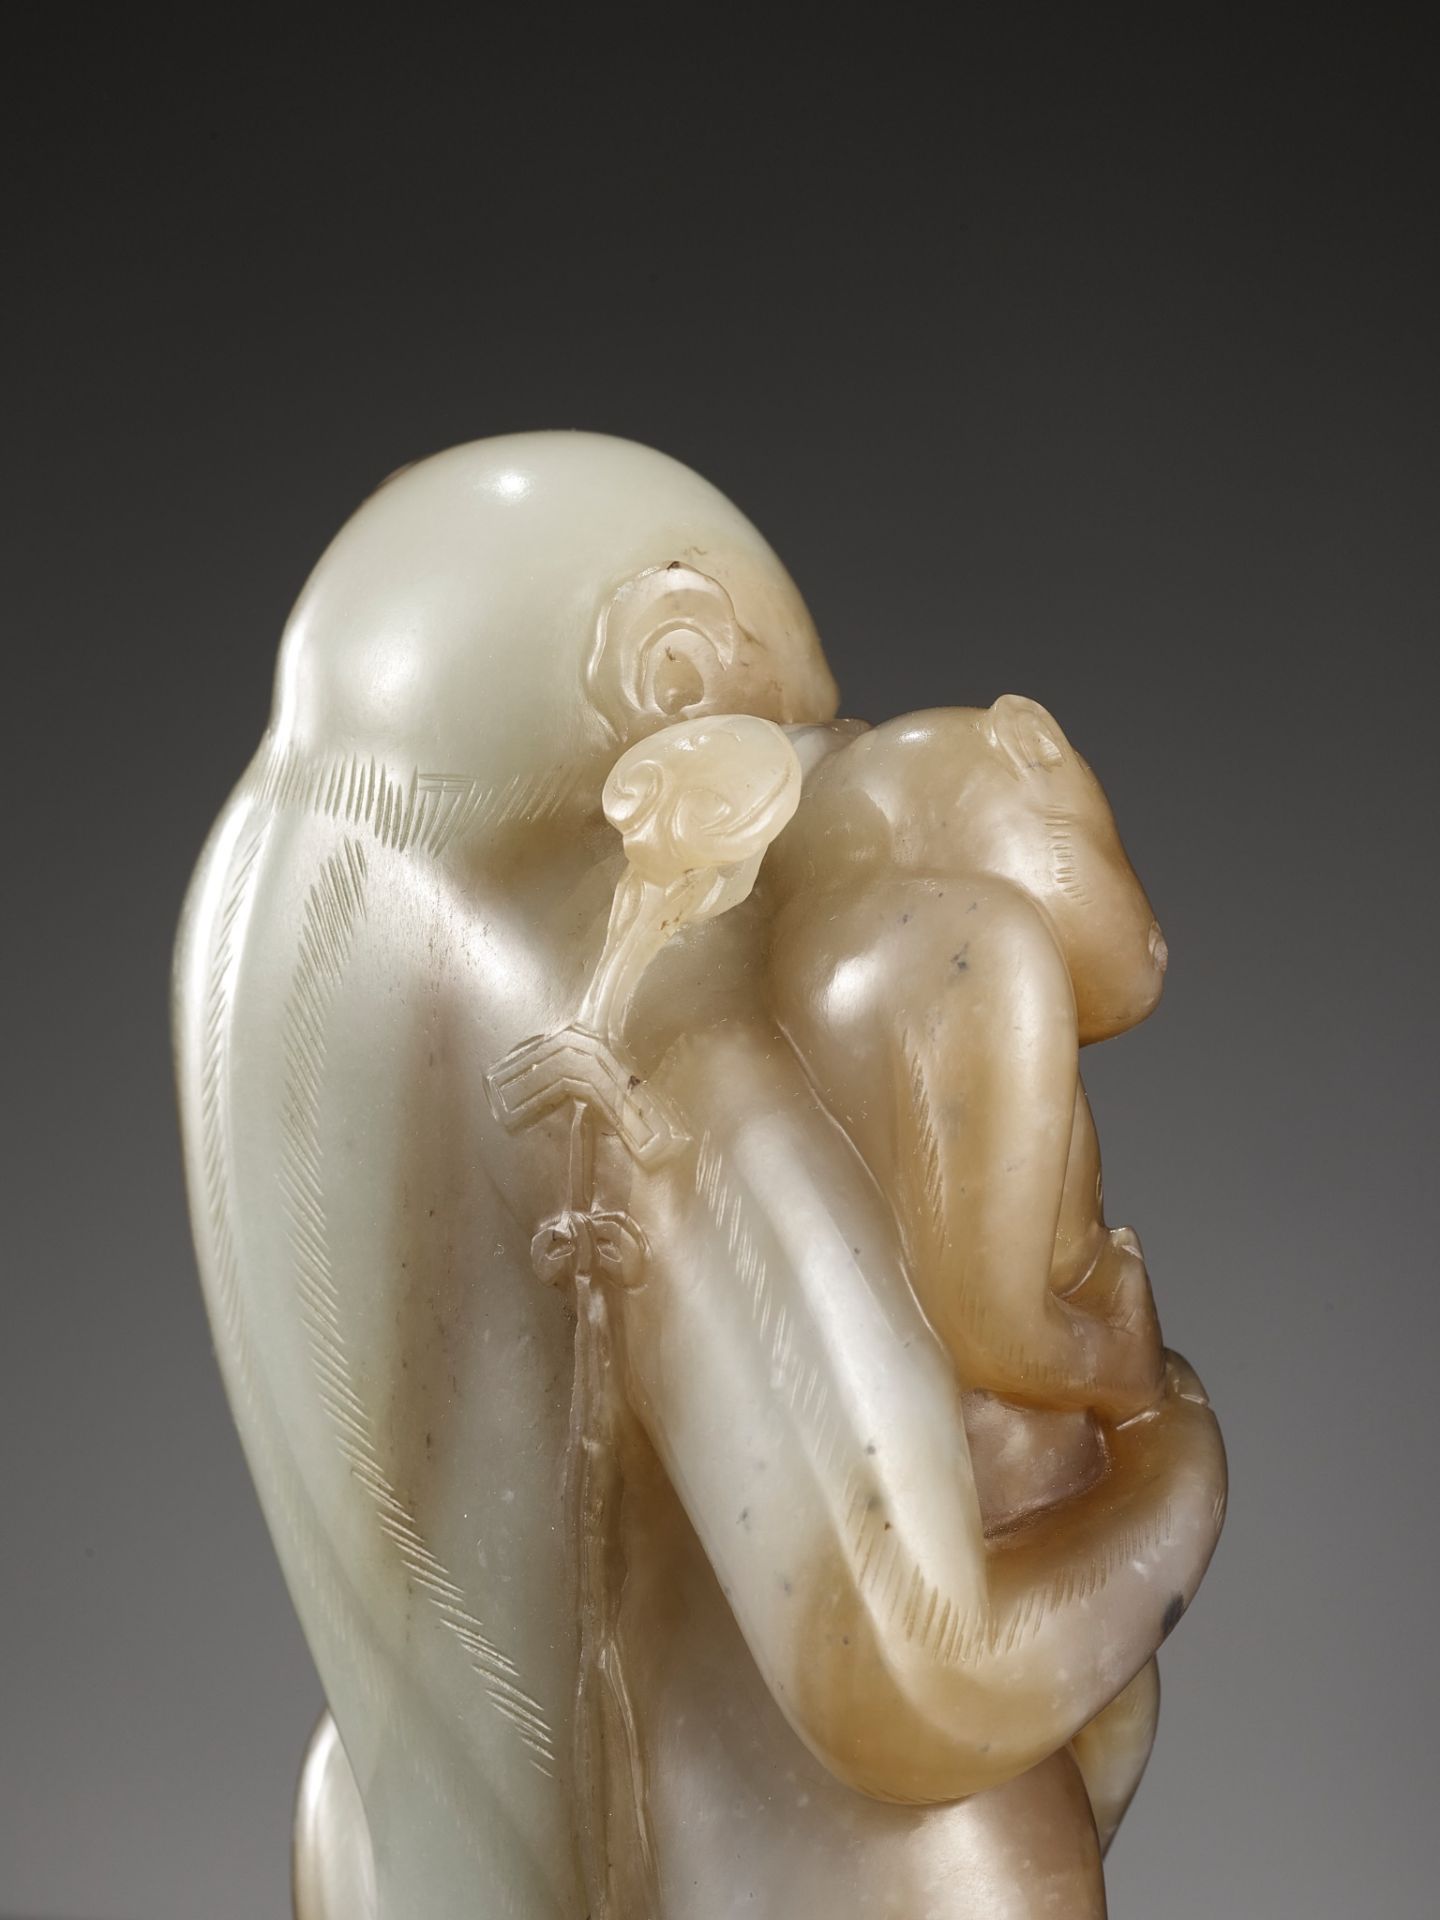 A FINE PALE CELADON AND CHESTNUT BROWN JADE 'MONKEYS AND PEACH' GROUP, 18TH CENTURY - Image 19 of 21